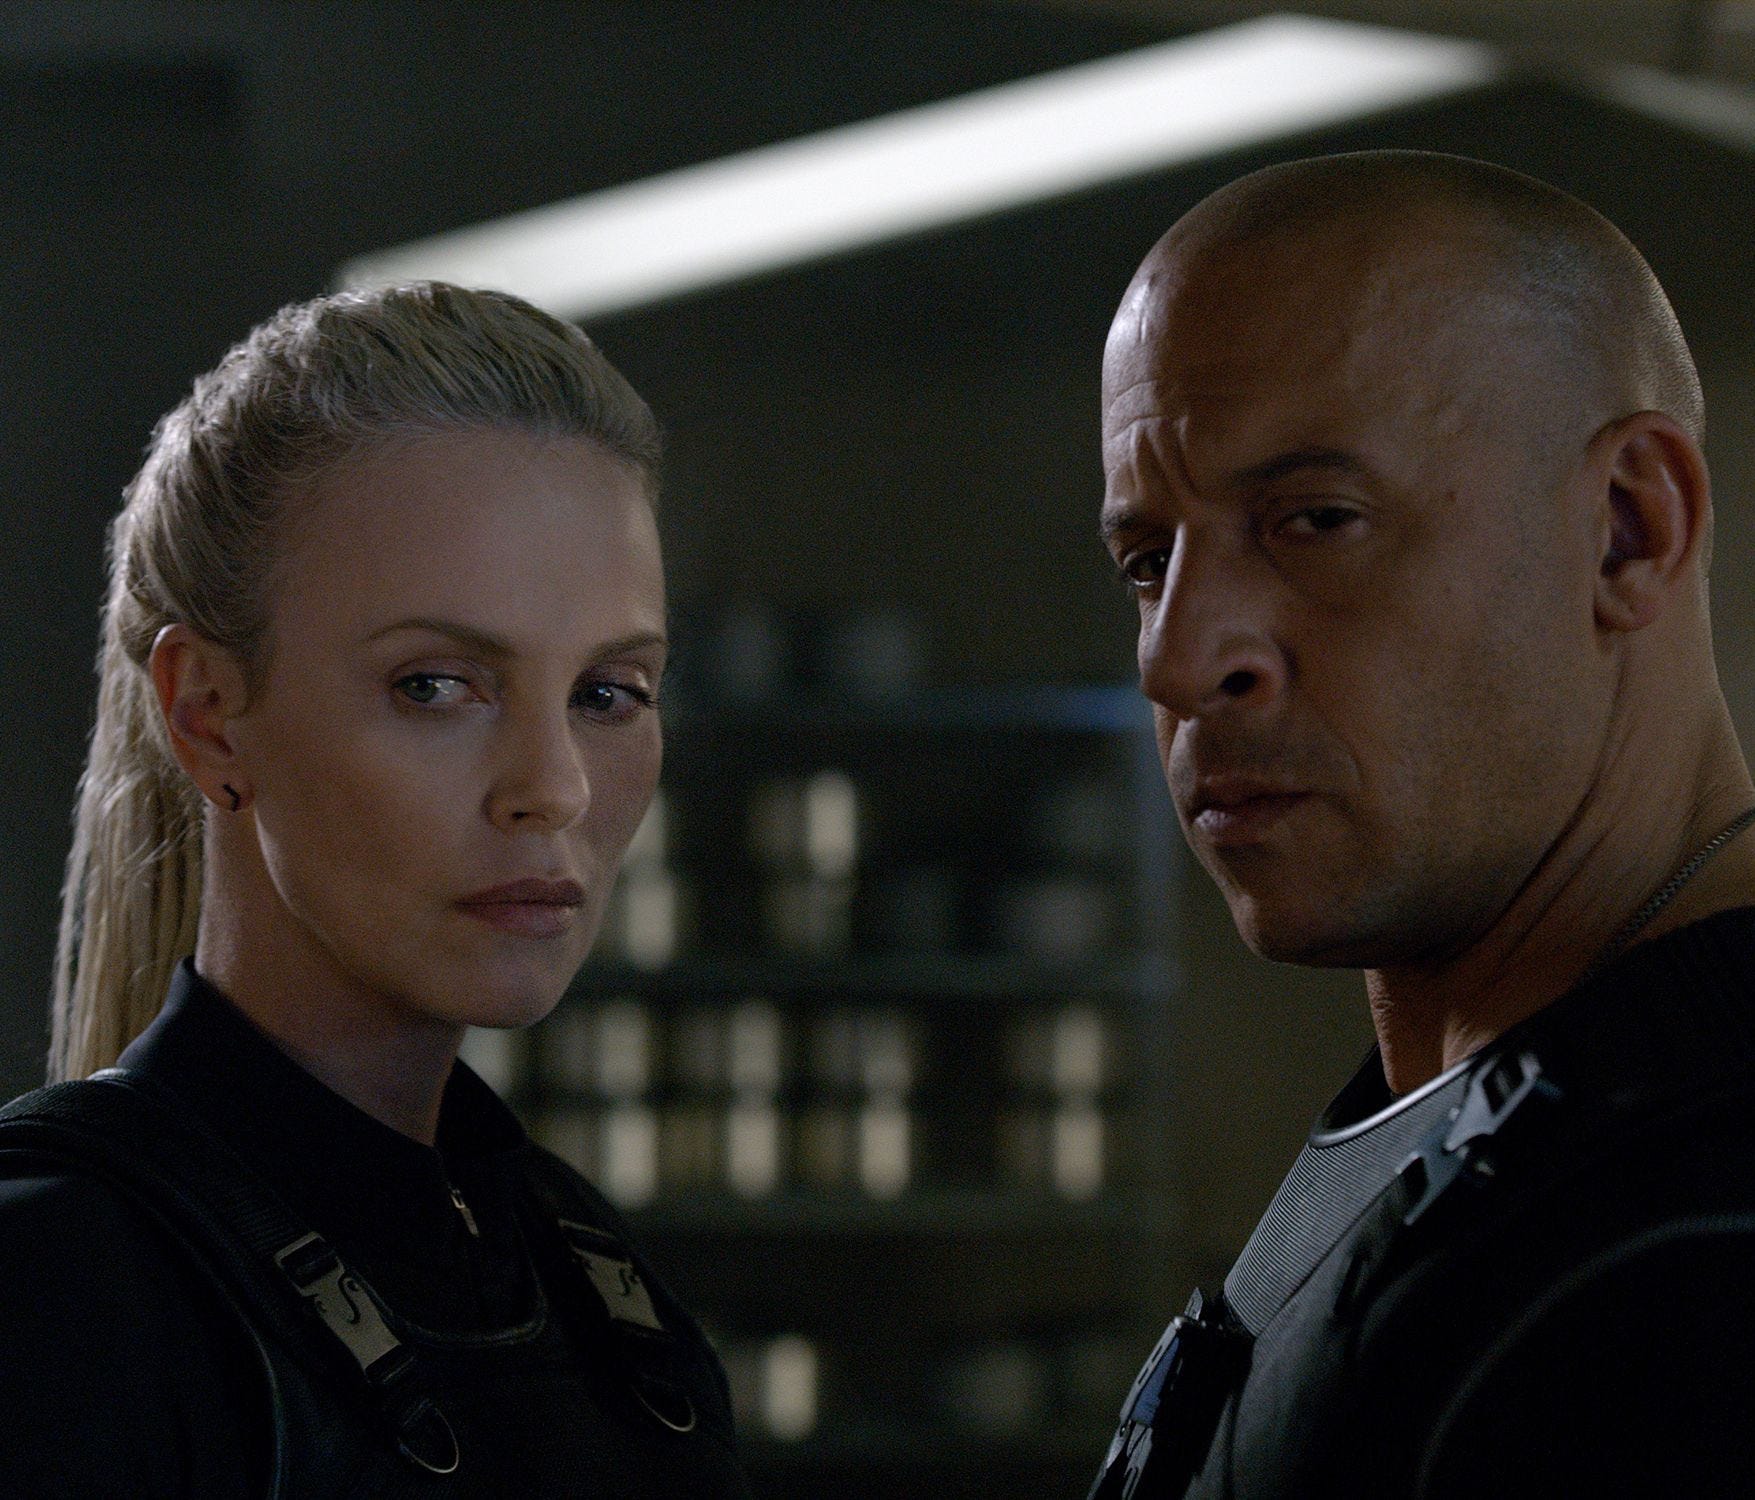 Charlize Theron and Vin Diesel have a meeting of minds (and lips) in 'The Fate of the Furious.'